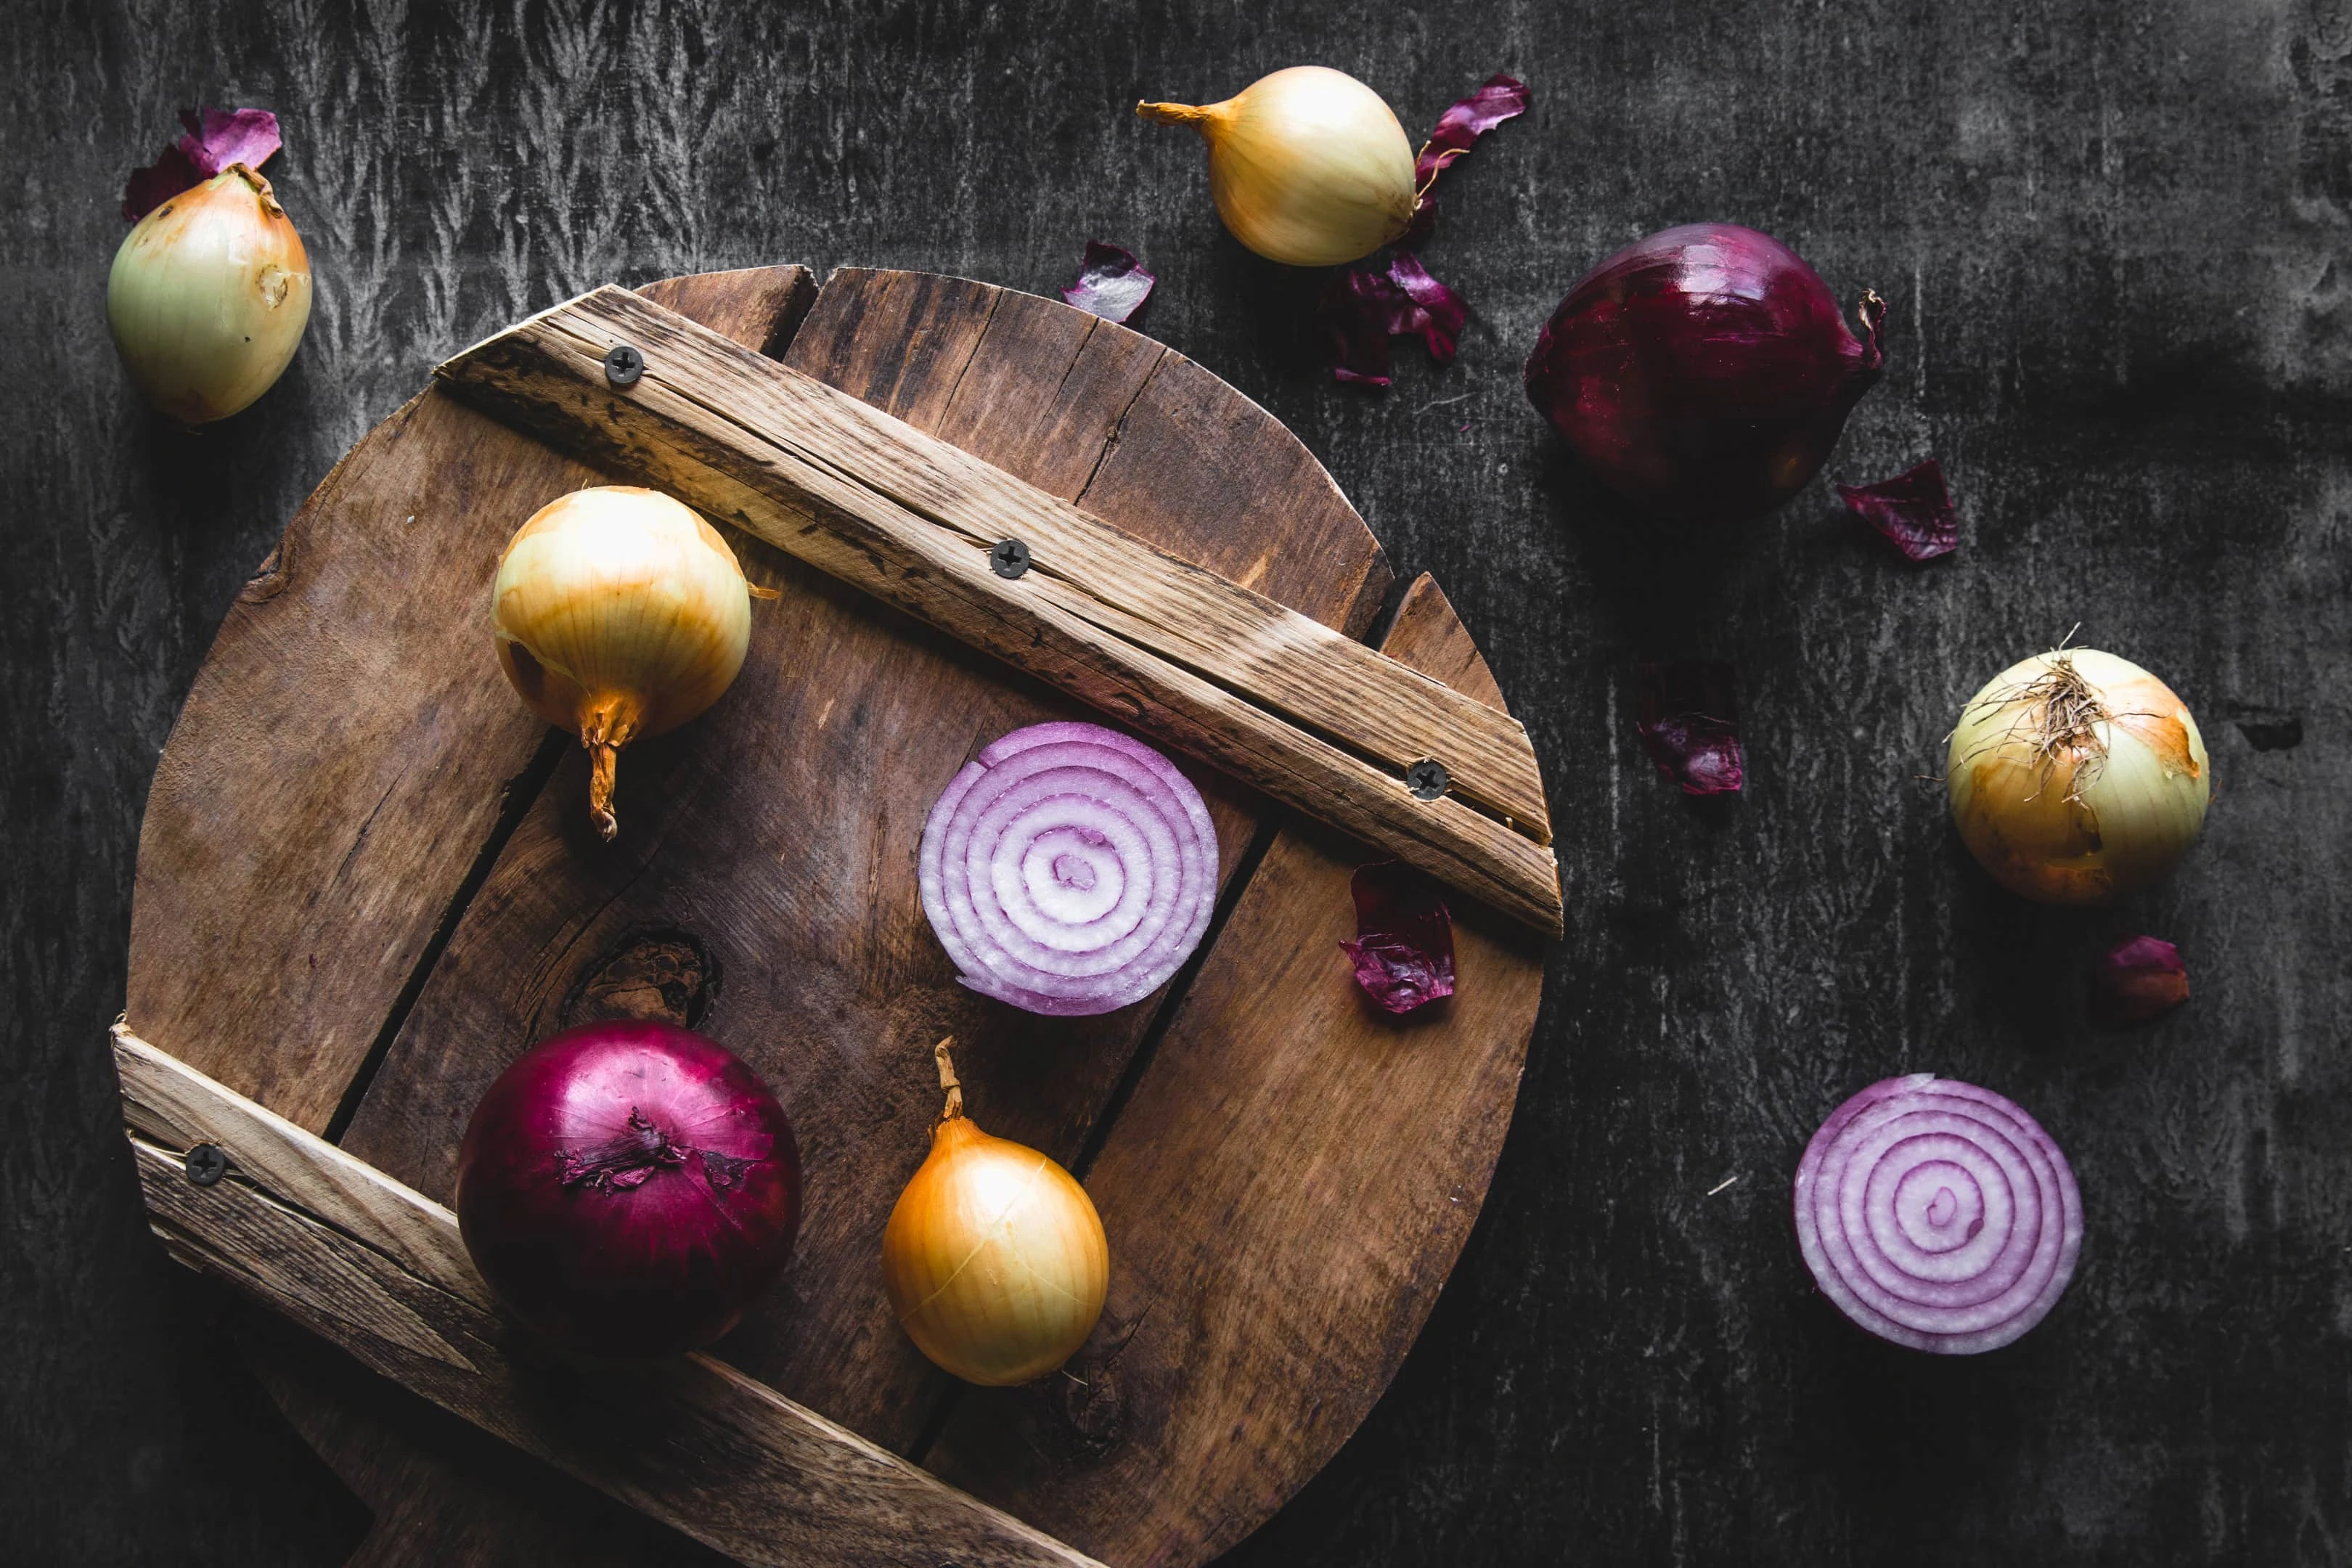 Red onion slices and yellow onions on wooden board